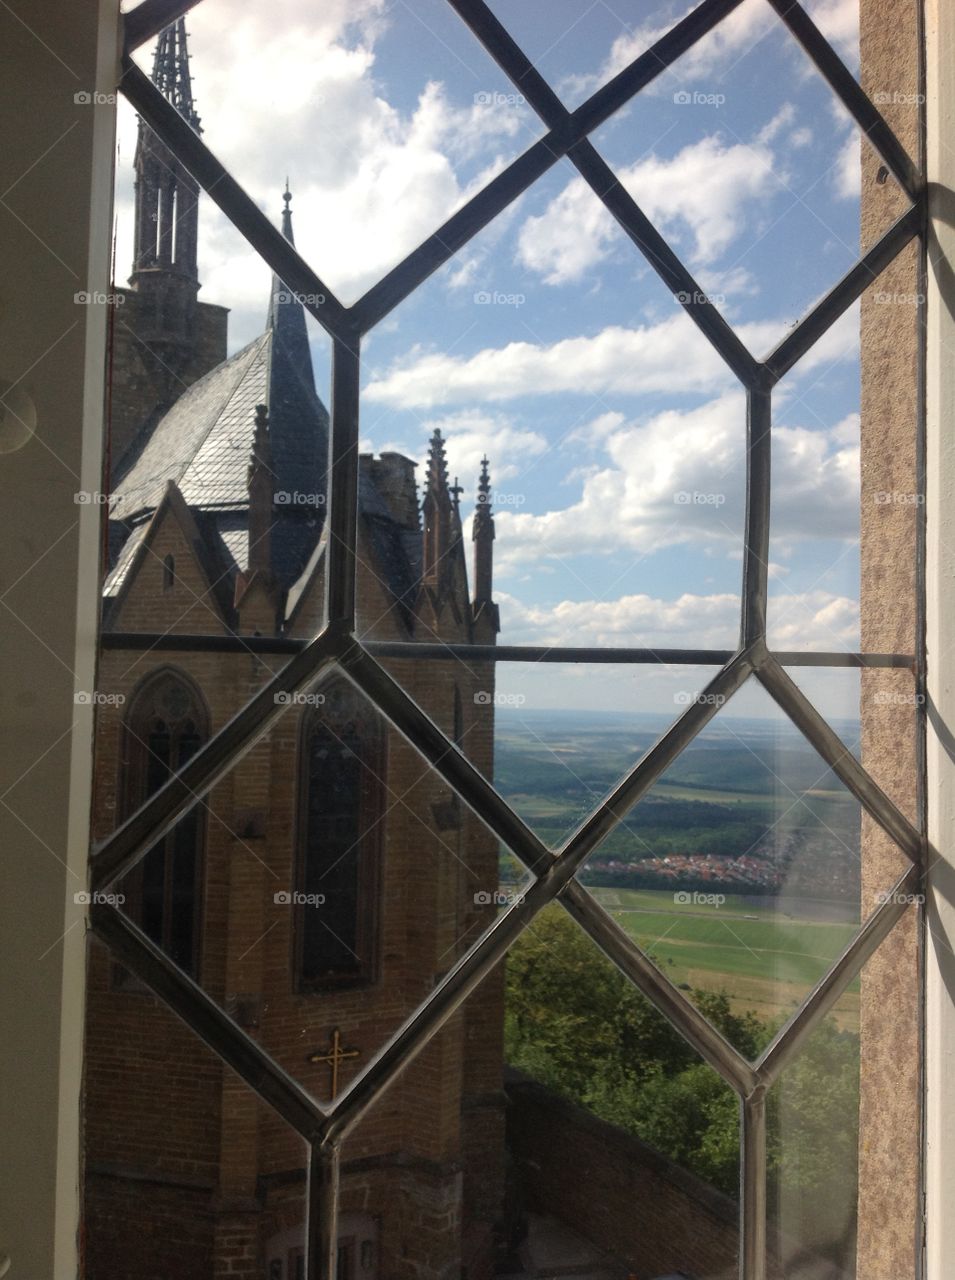 Hohenzollern Turret View. Hohenzollern Castle, Bisinger, Germany. "Zollerberg" dates back to the 12th century.